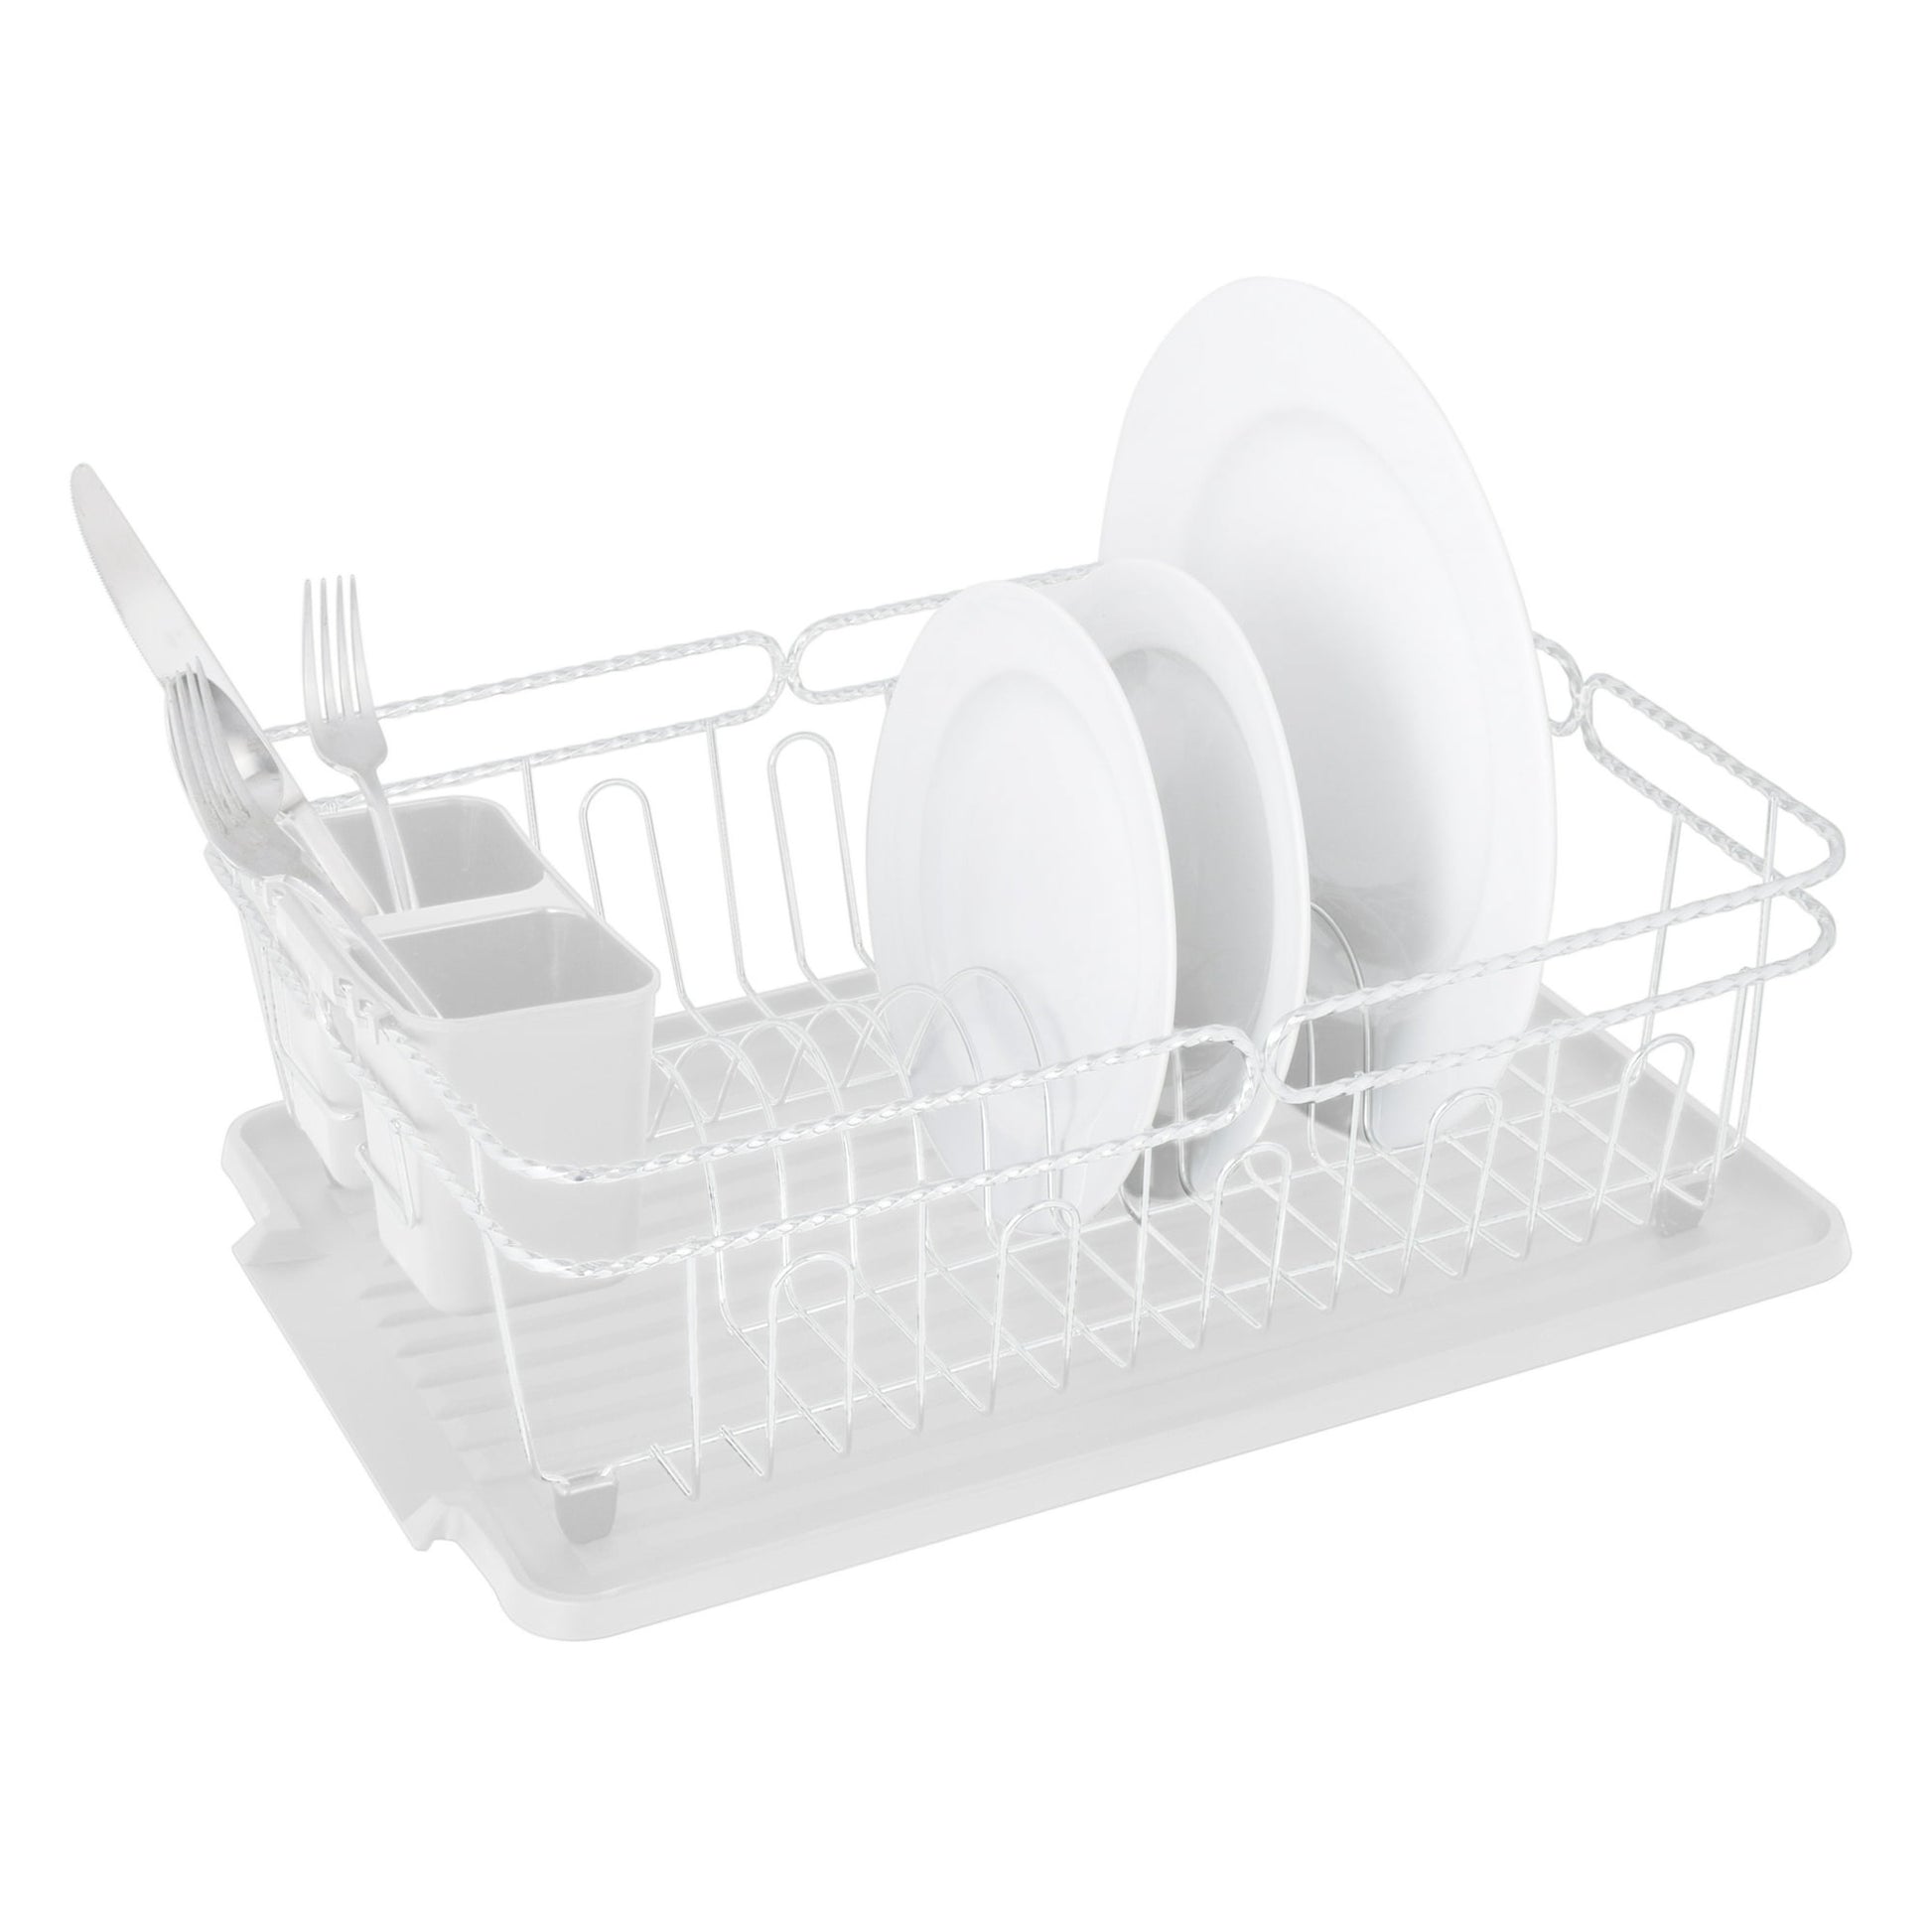 Kitchen Details Twisted Chrome 3 Piece Dish Rack in White